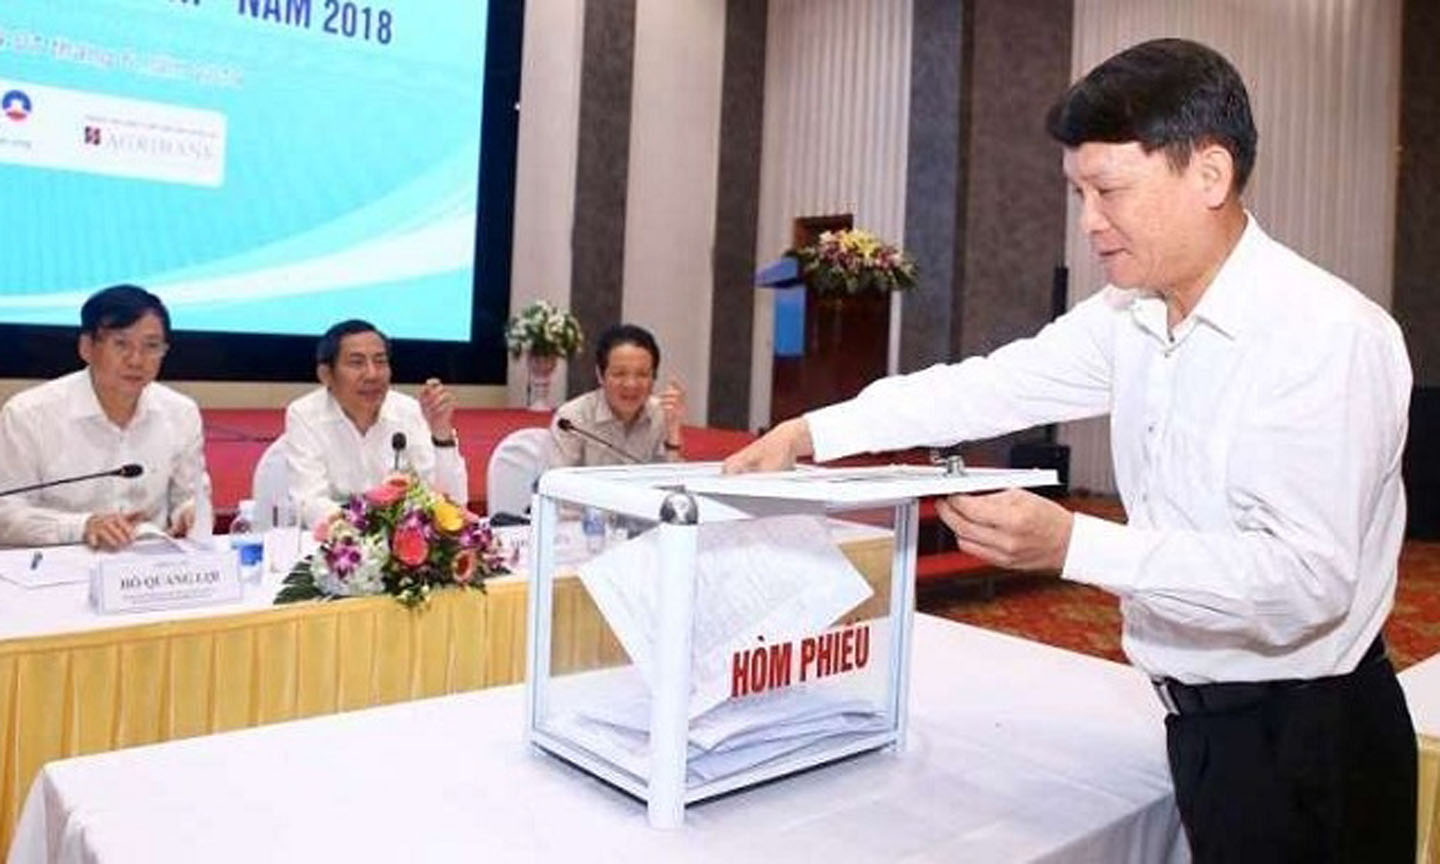 A member of the jury council casts his vote for the final phase of the National Press Awards 2018. (Photo: VNA)